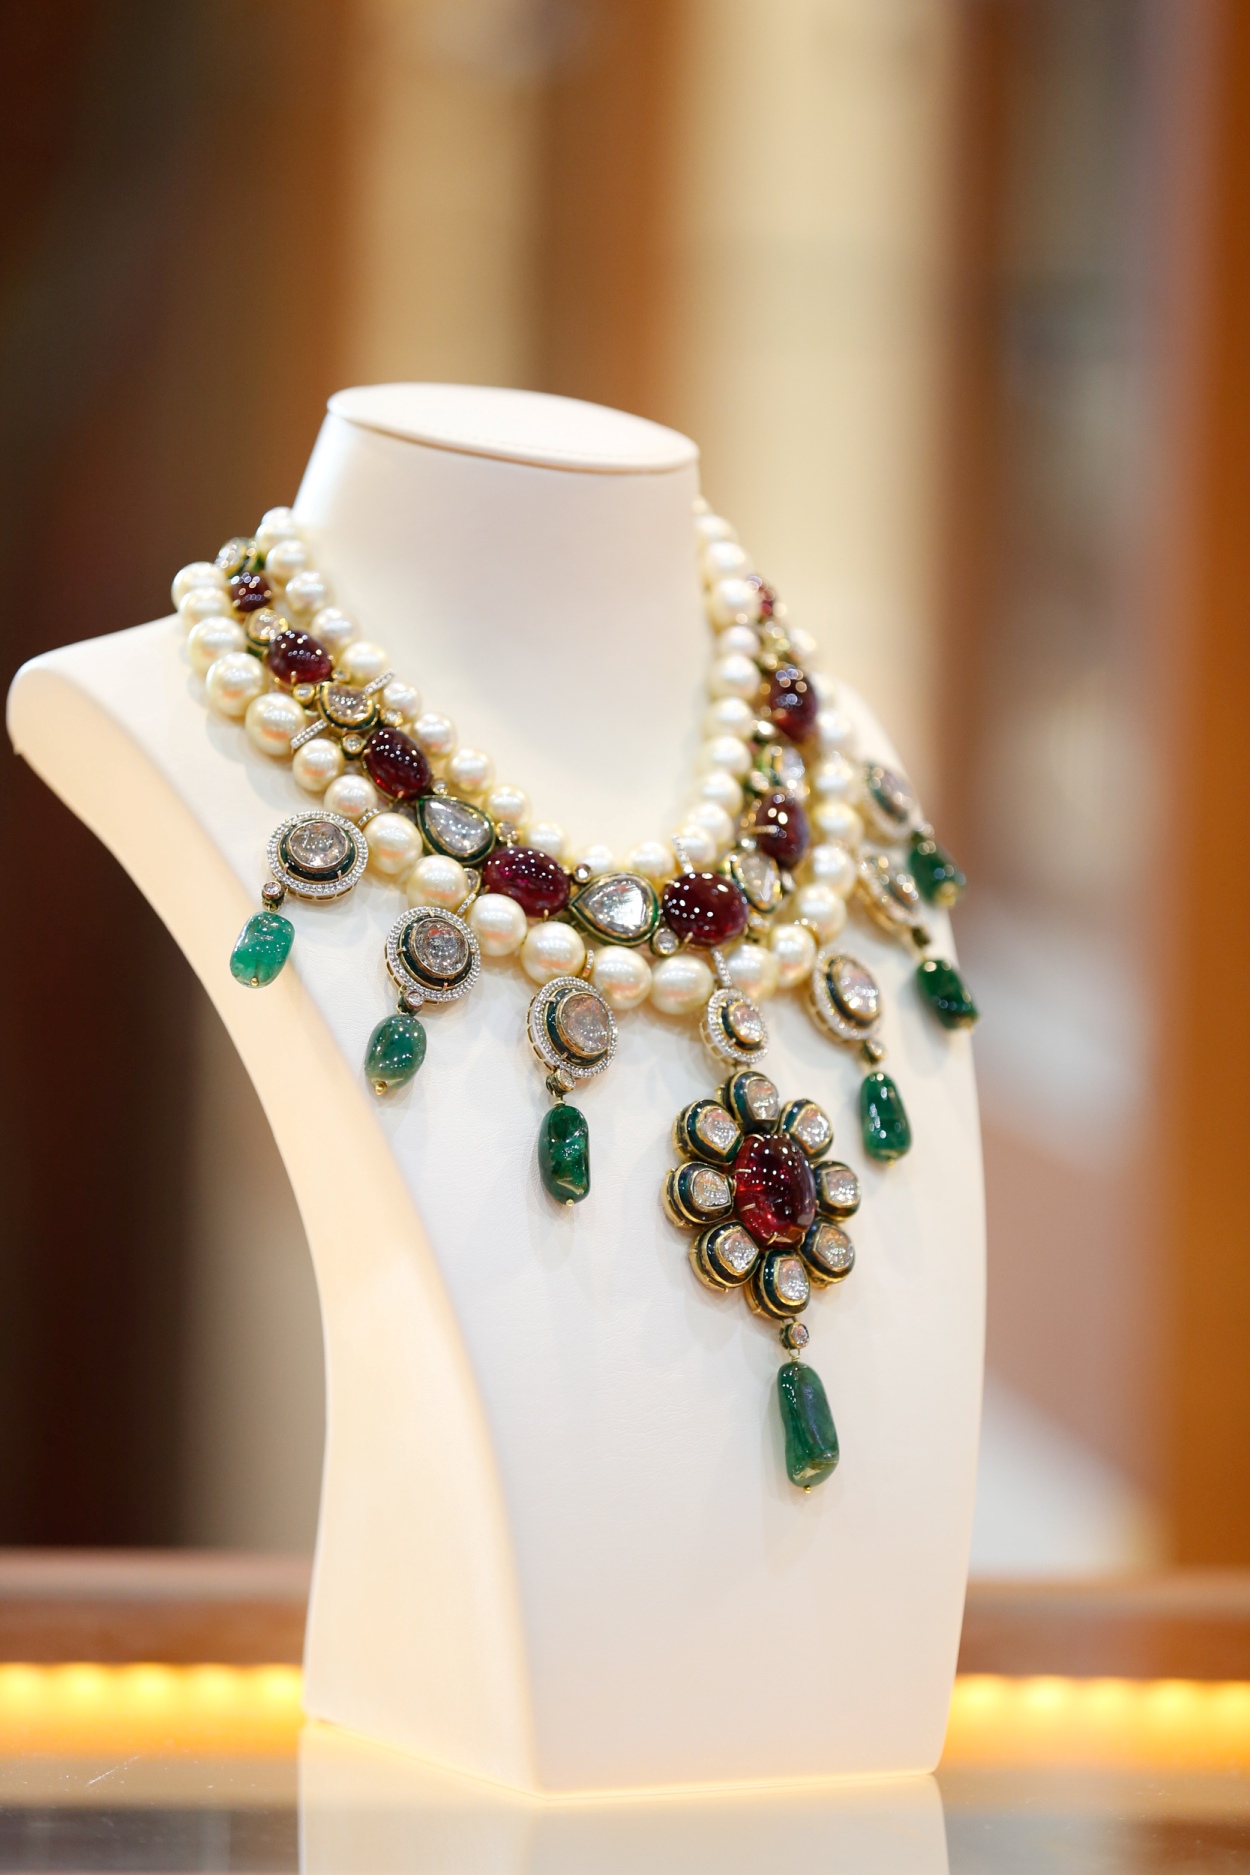 Inspired by designs worn by Indian royalty, Bharnay’s unique piece from the Royal Jewels Collection contains old diamonds, emeralds, rubies and classic pearl drops. The set retails for AED 239,000. 